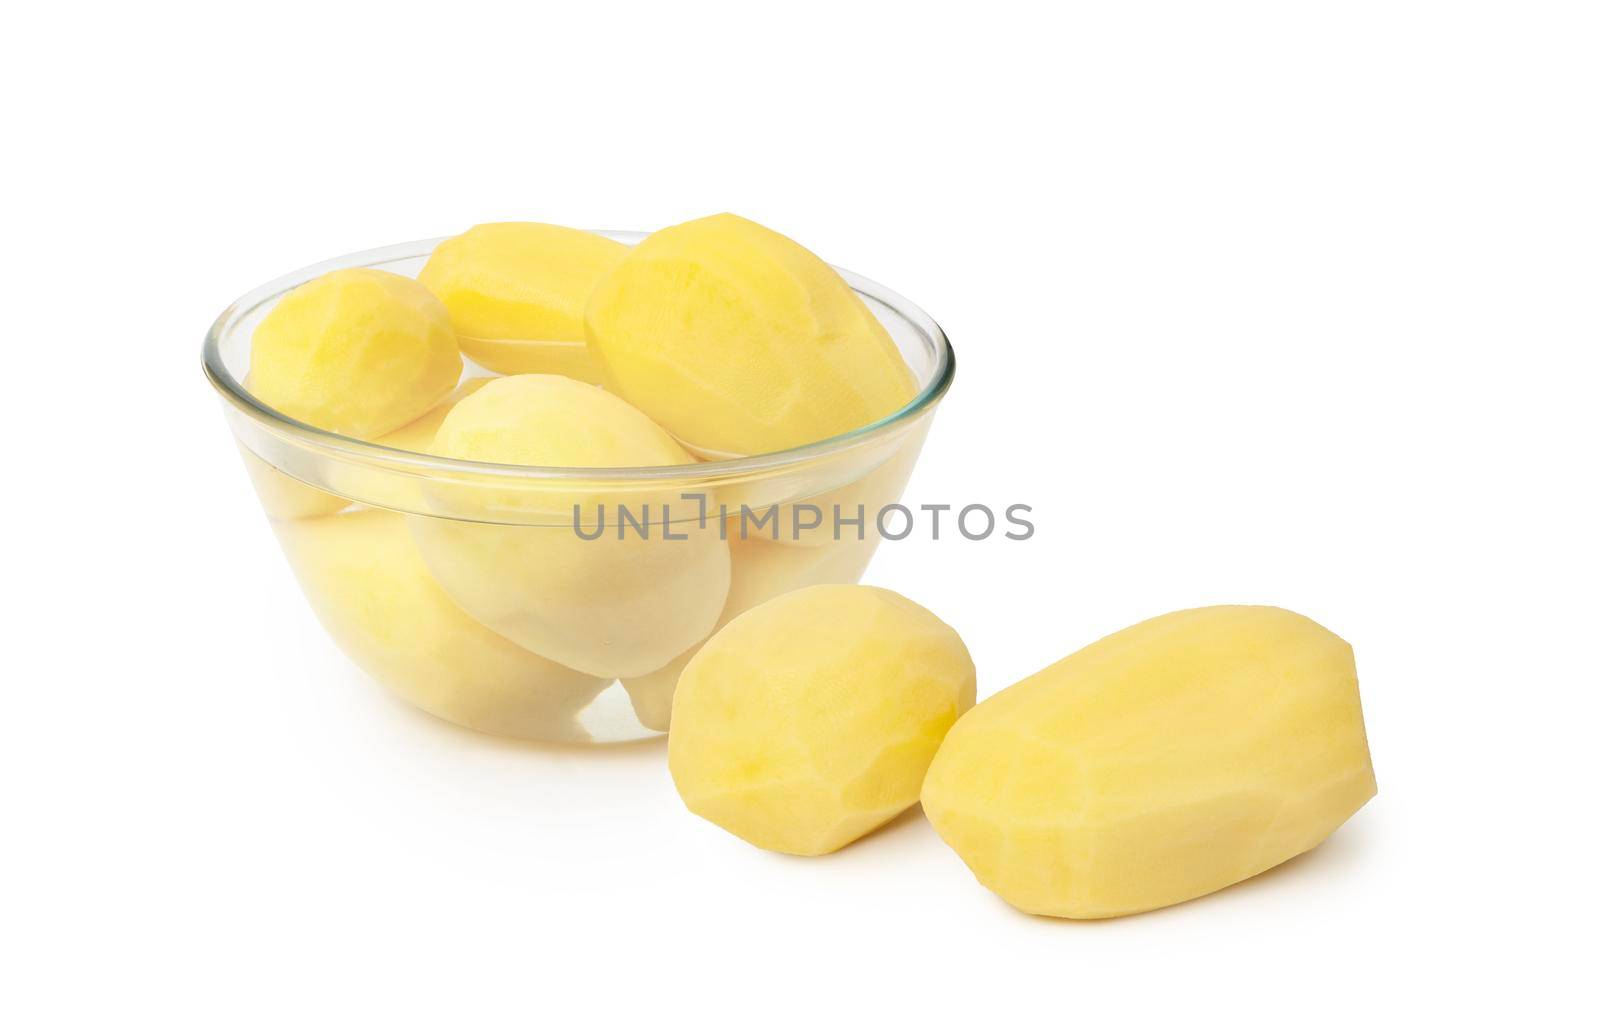 Peeled potatoes in a glass bowl isolated on white by SlayCer